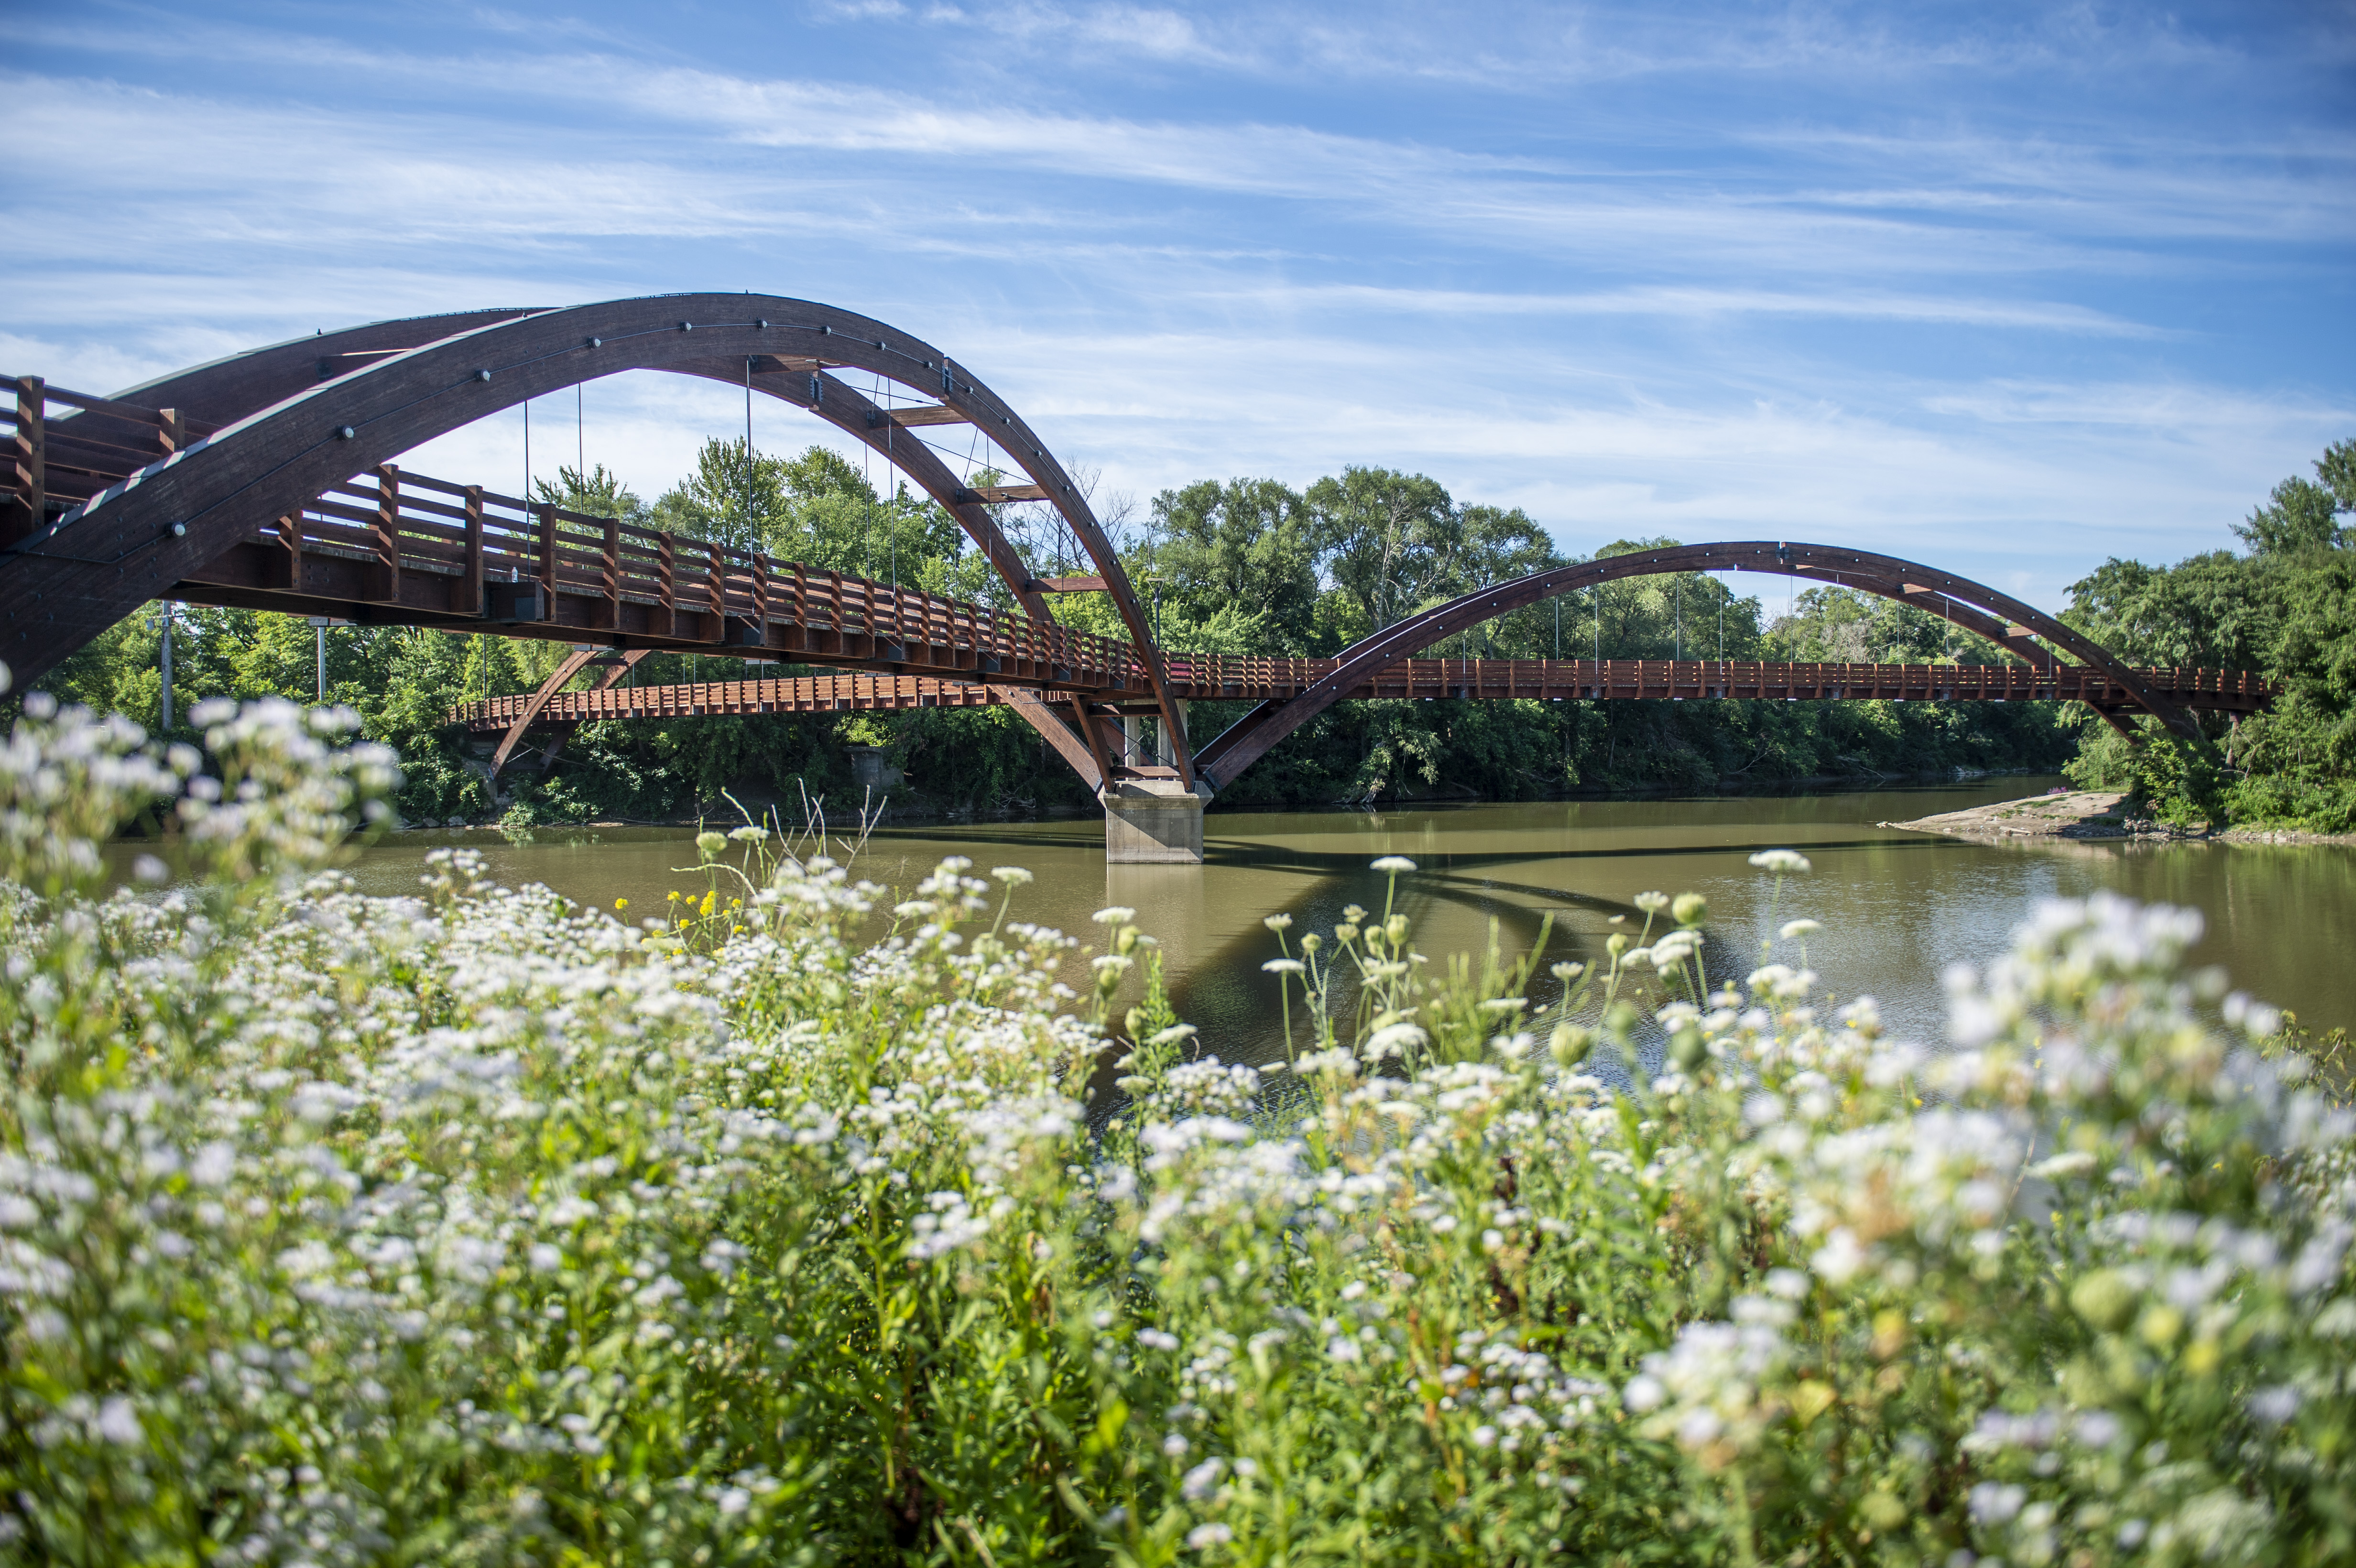 A view of the Tridge in Midland on Thursday, July 30, 2020. The devastating flood in May gushed over the majority of land in this area. (Kaytie Boomer | MLive.com)